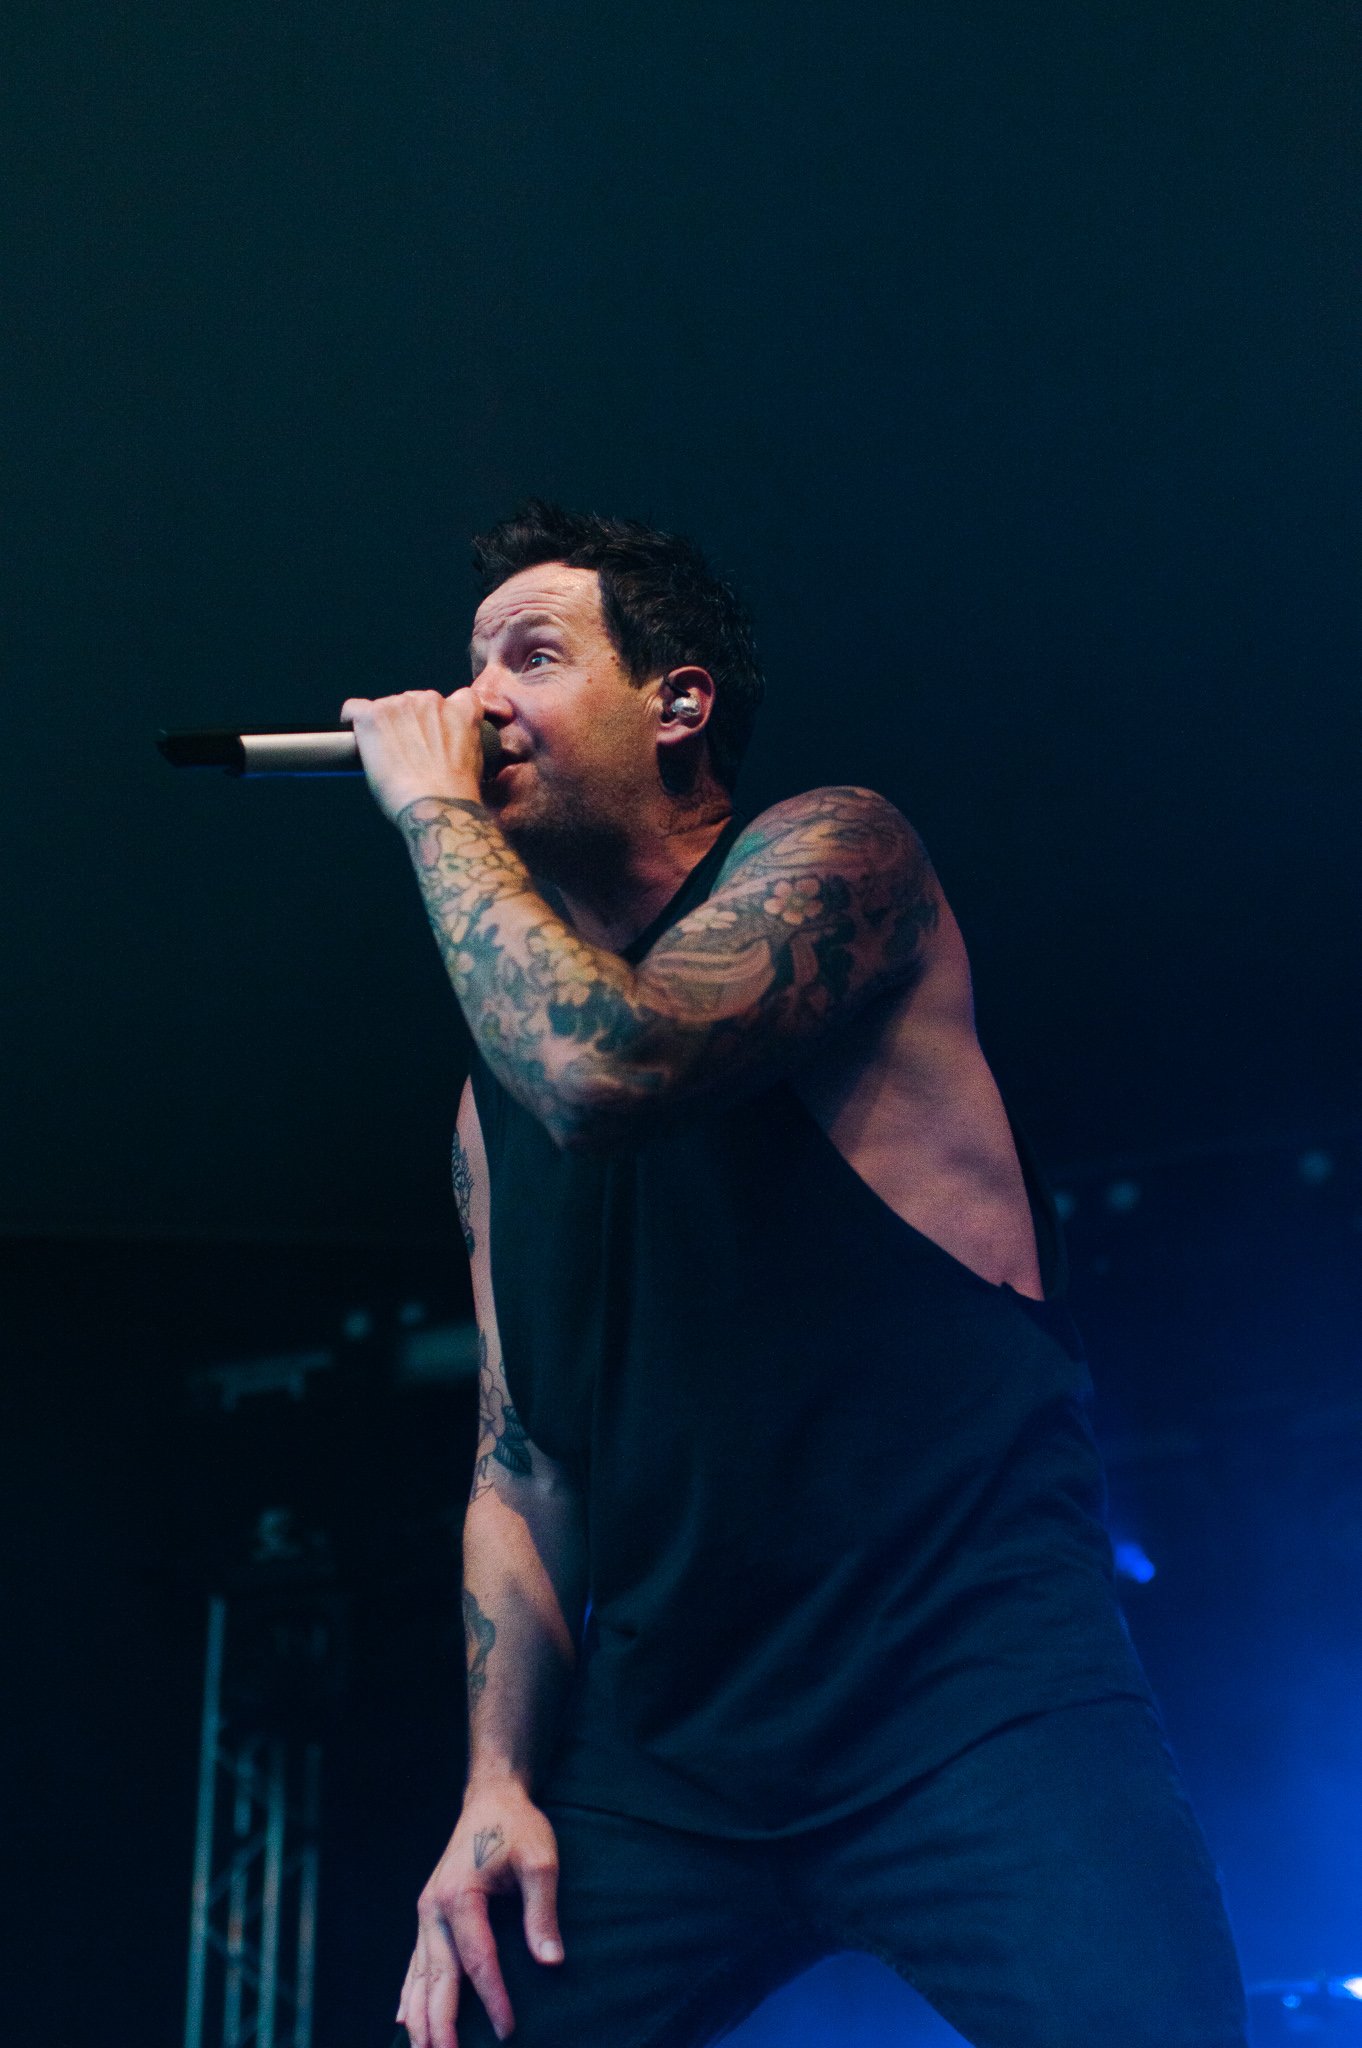  Pierre Bouvier gives a high energy performance as the lead singer of Simple Plan. 